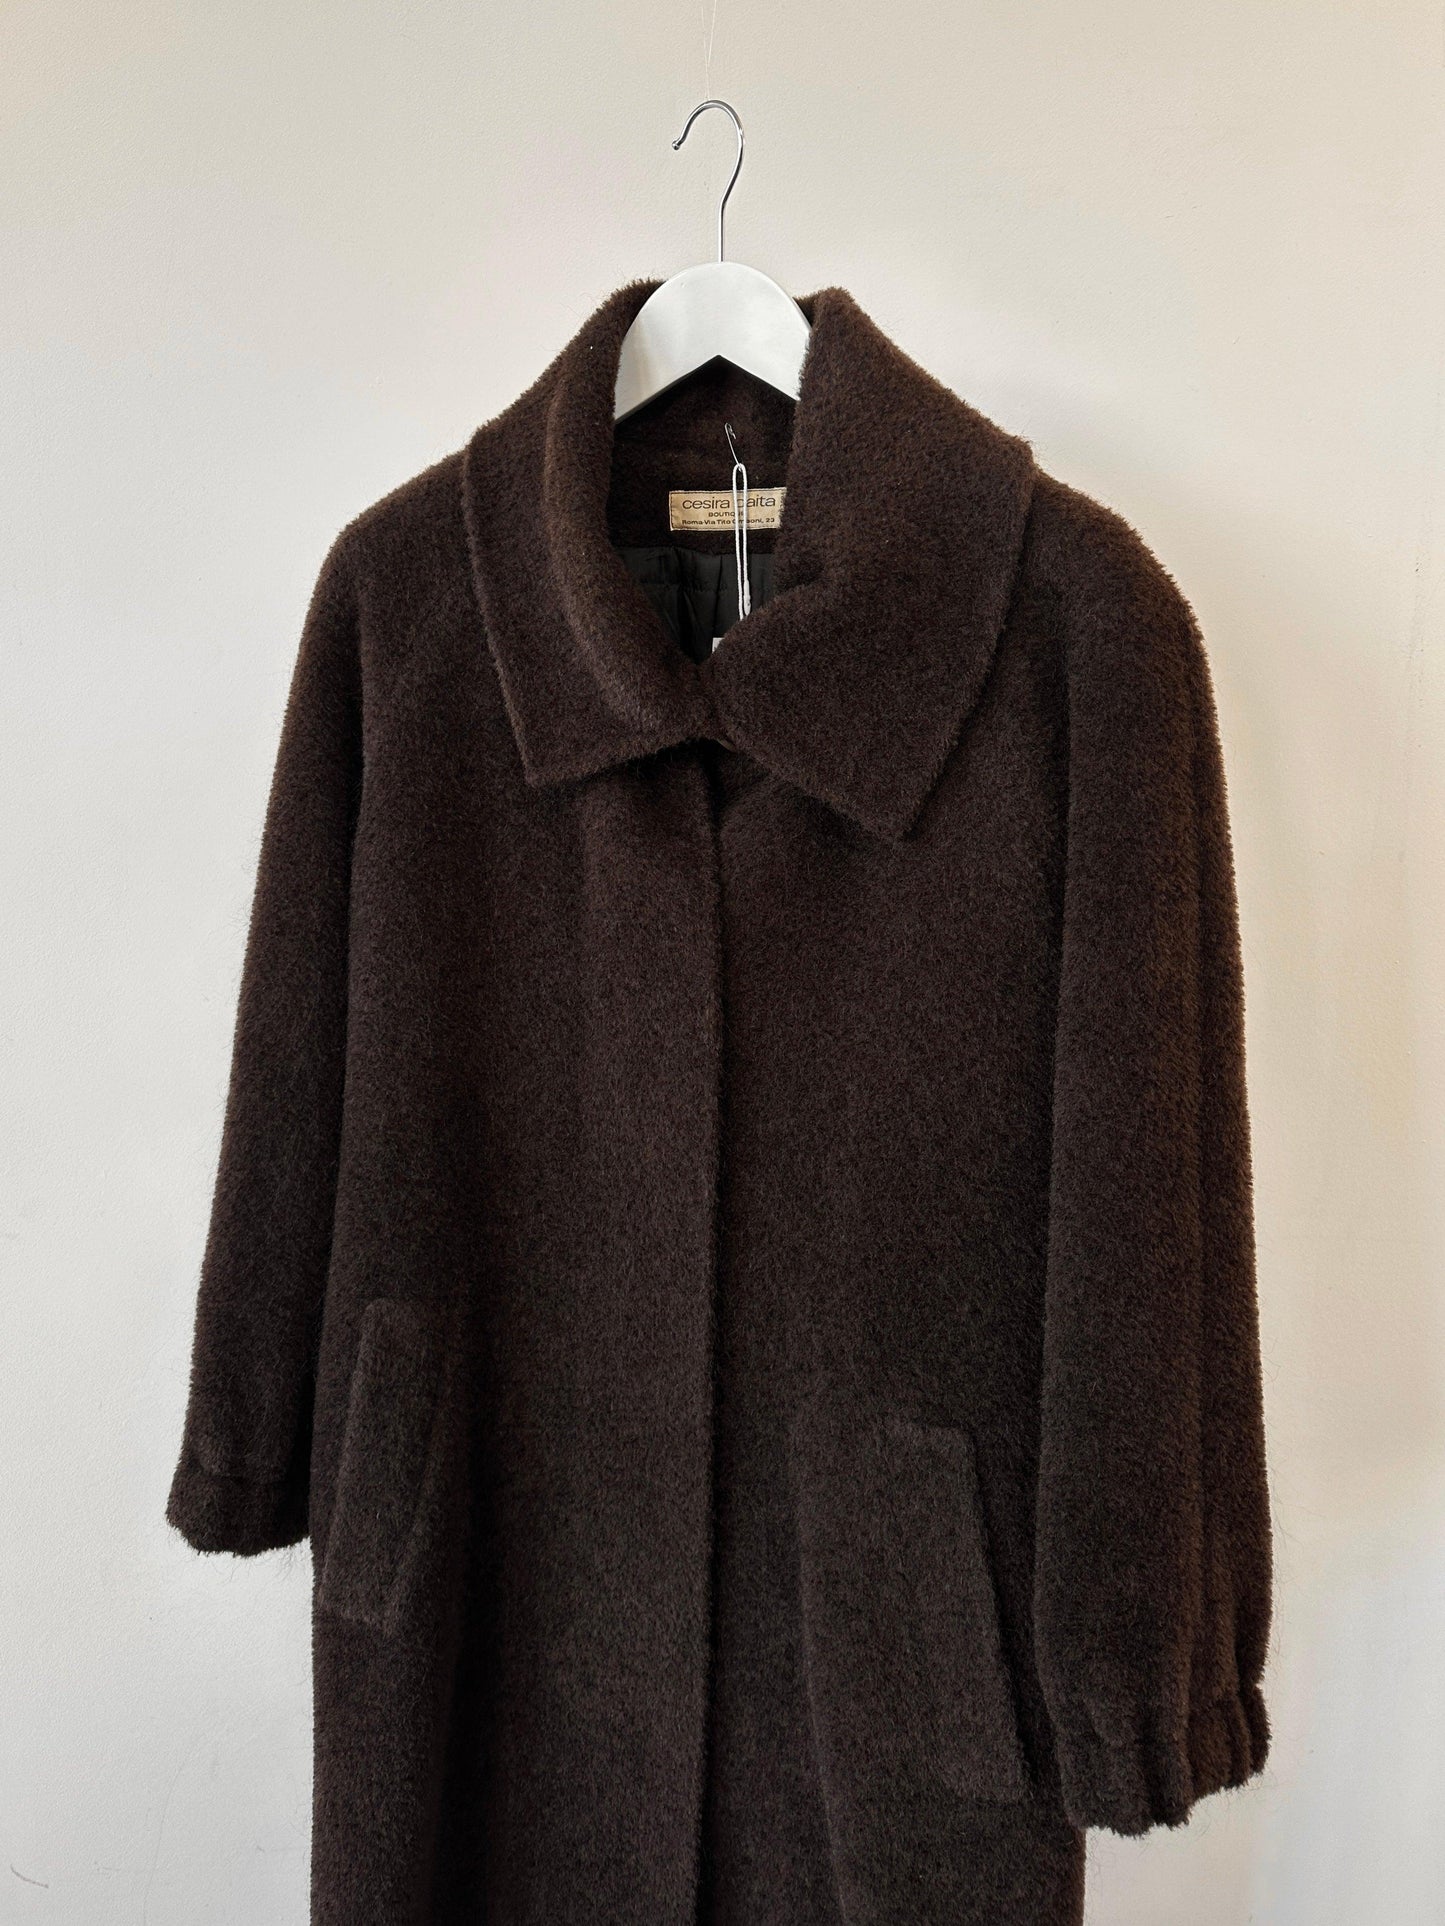 Italian Vintage Wool Mohair Teddy Concealed Placket Coat - M - Known Source